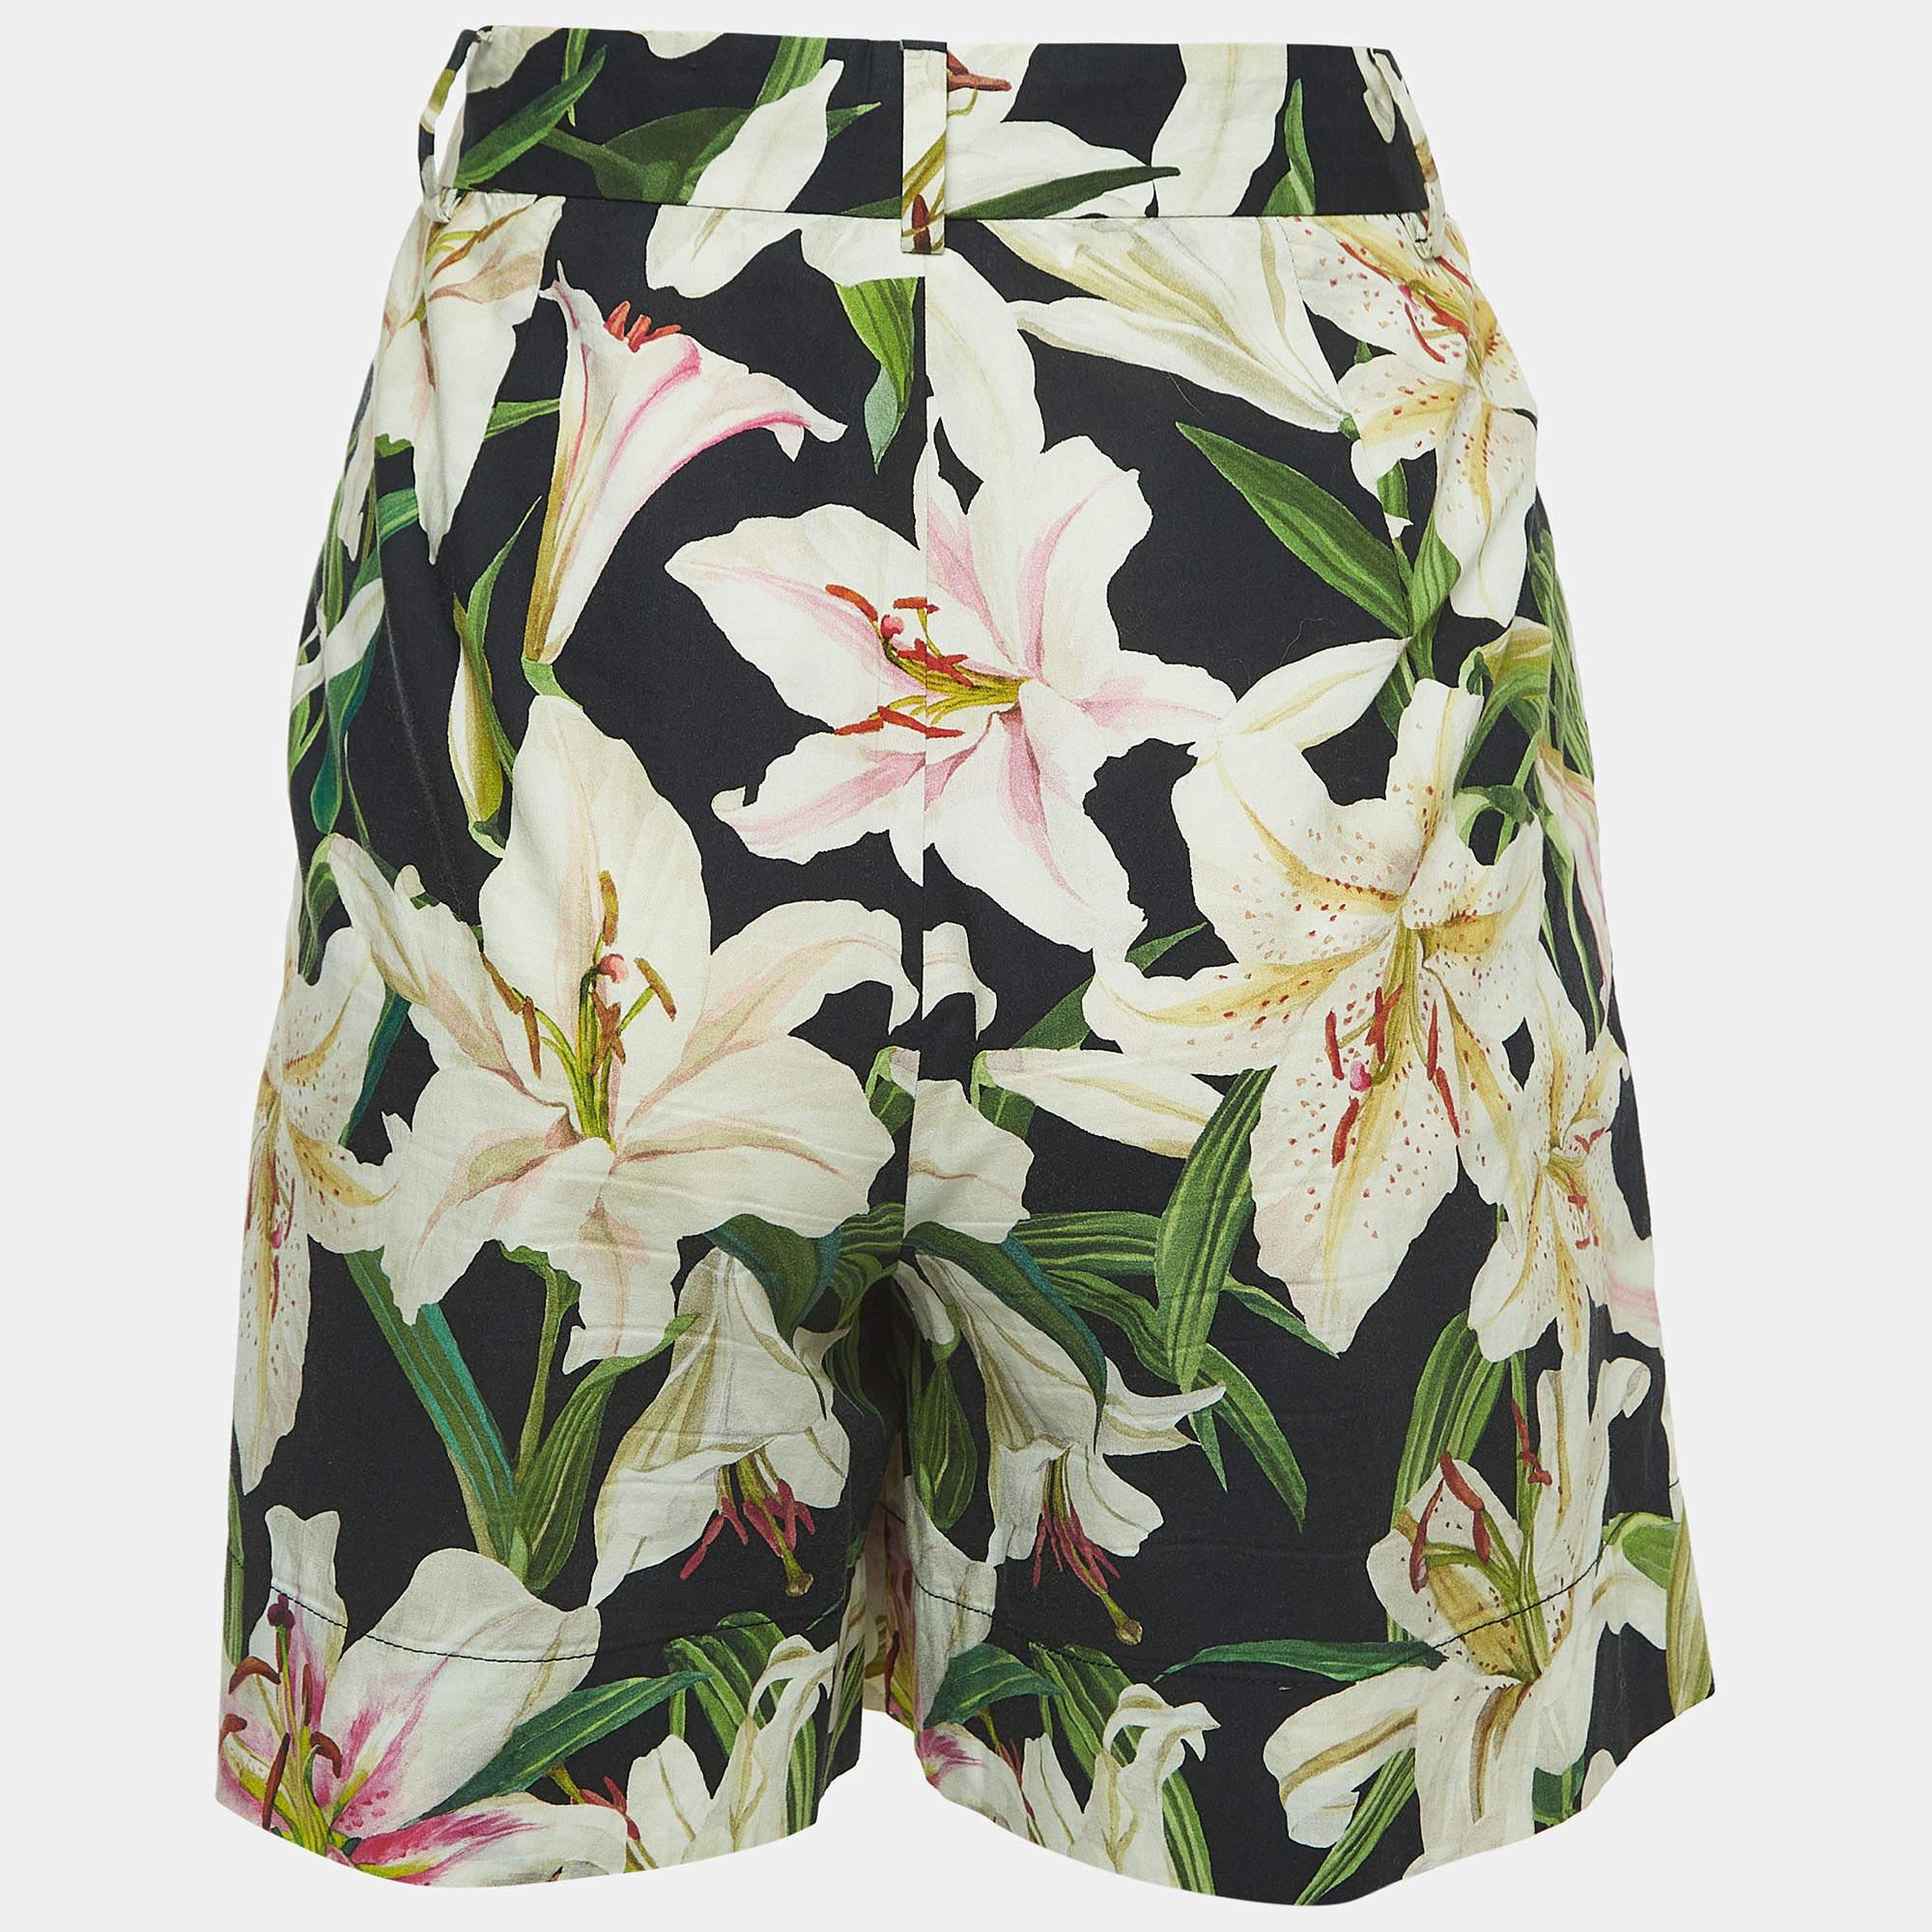 Relaxed days call for a pair of shorts like this. Stitched using high-quality fabric, these designer shorts are styled with classic details and have a superb length. Wear it with T-shirts.

